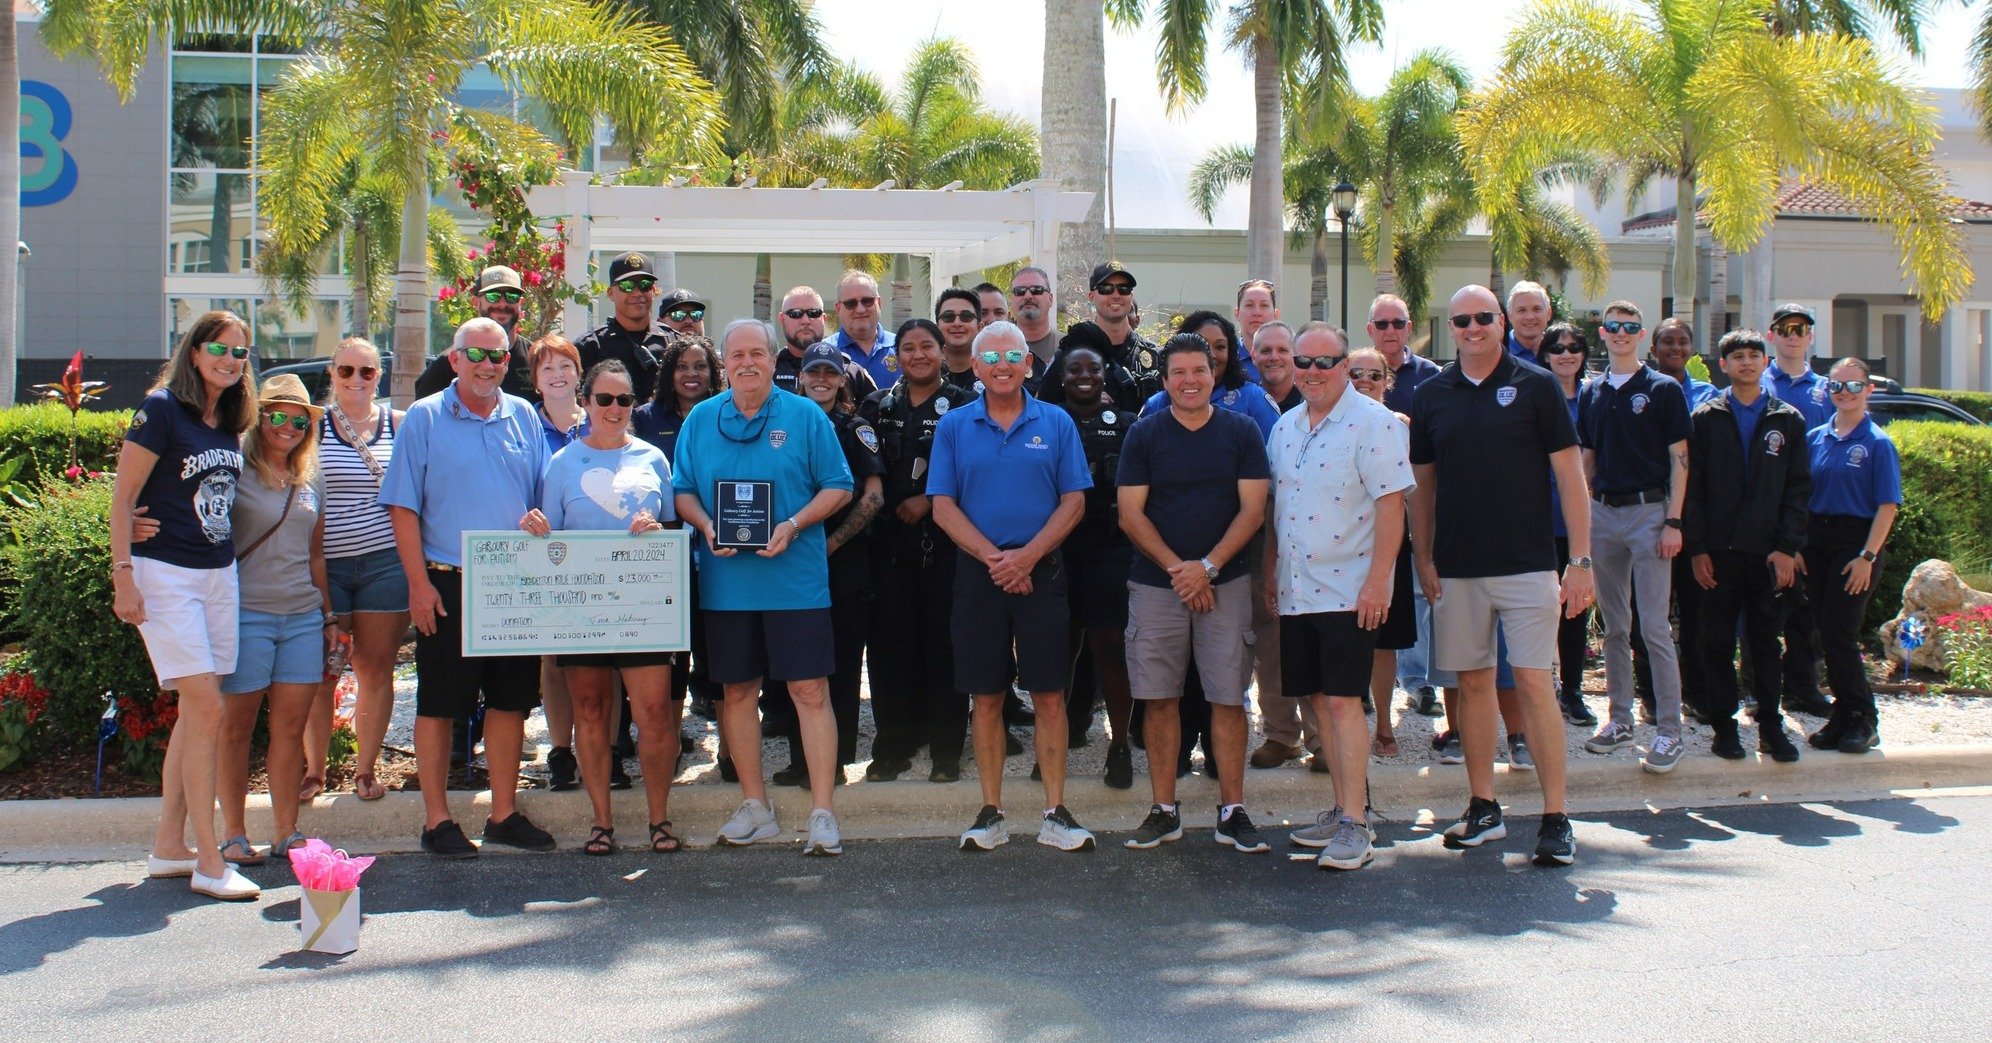 As #AutismAwarenessMonth concludes, Bradenton PD is thrilled to announce a tremendous donation of $23,000 to the Bradenton Blue Foundation to support BPD's Autism-related community awareness and advanced training for our officers. Proceeds from the a